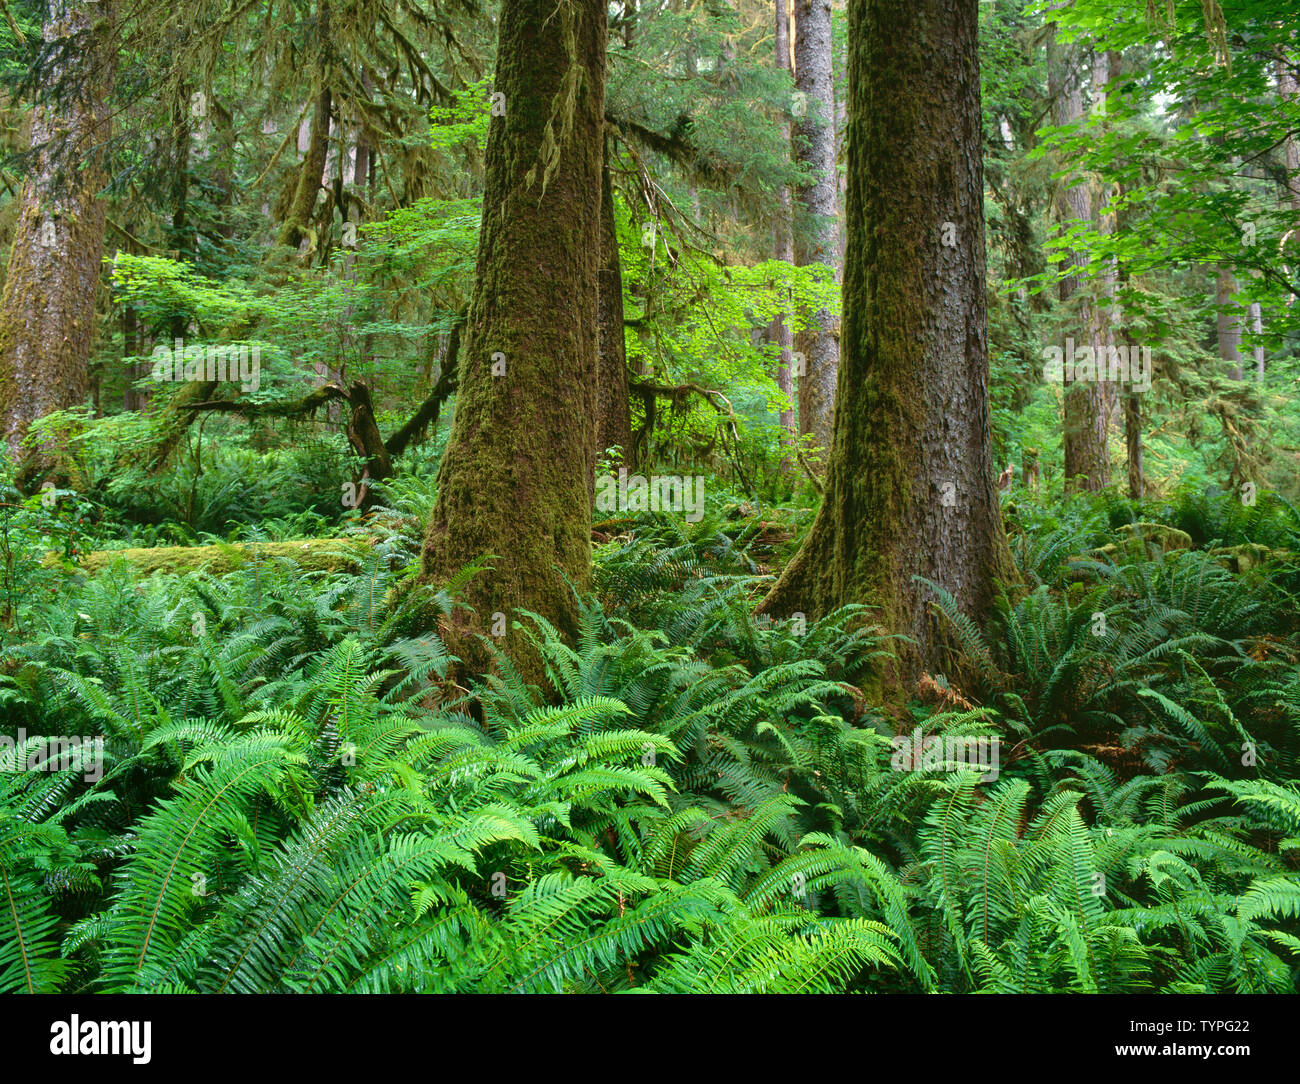 USA, Washington, Olympic National Park, Trunks of Sitka spruce with sword fern in the understory; Hoh Rain Forest. Stock Photo